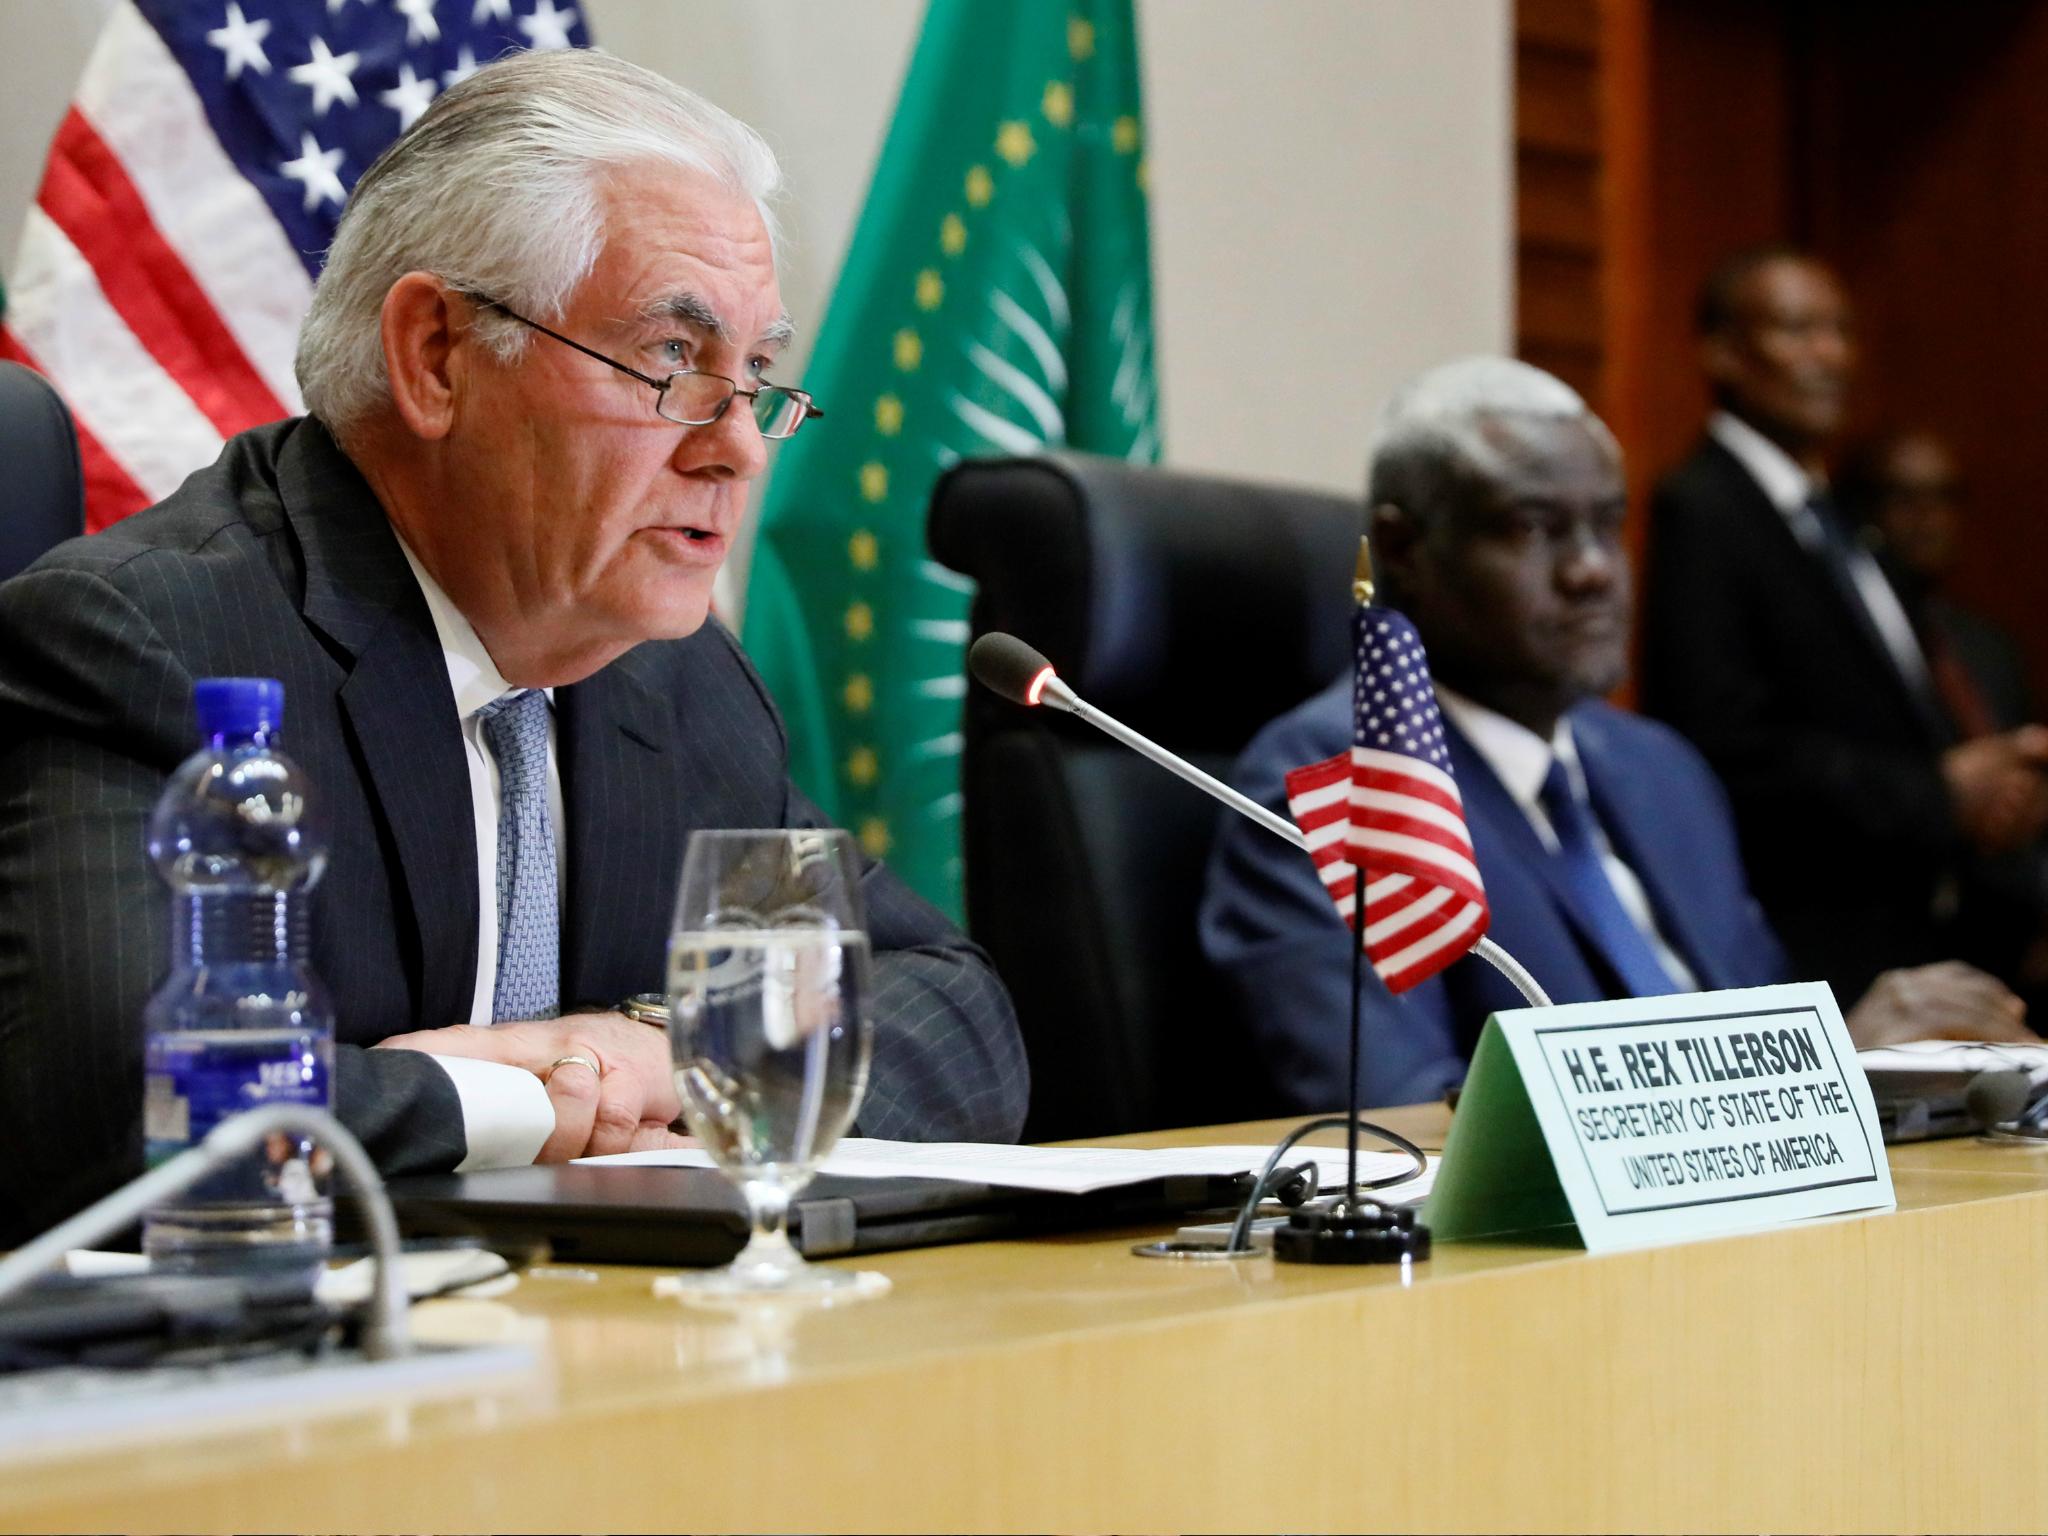 US Secretary of State Rex Tillerson participated in a news conference with African Union Commission Chairman Moussa Faki on 8 March 2018 in Addis Ababa.